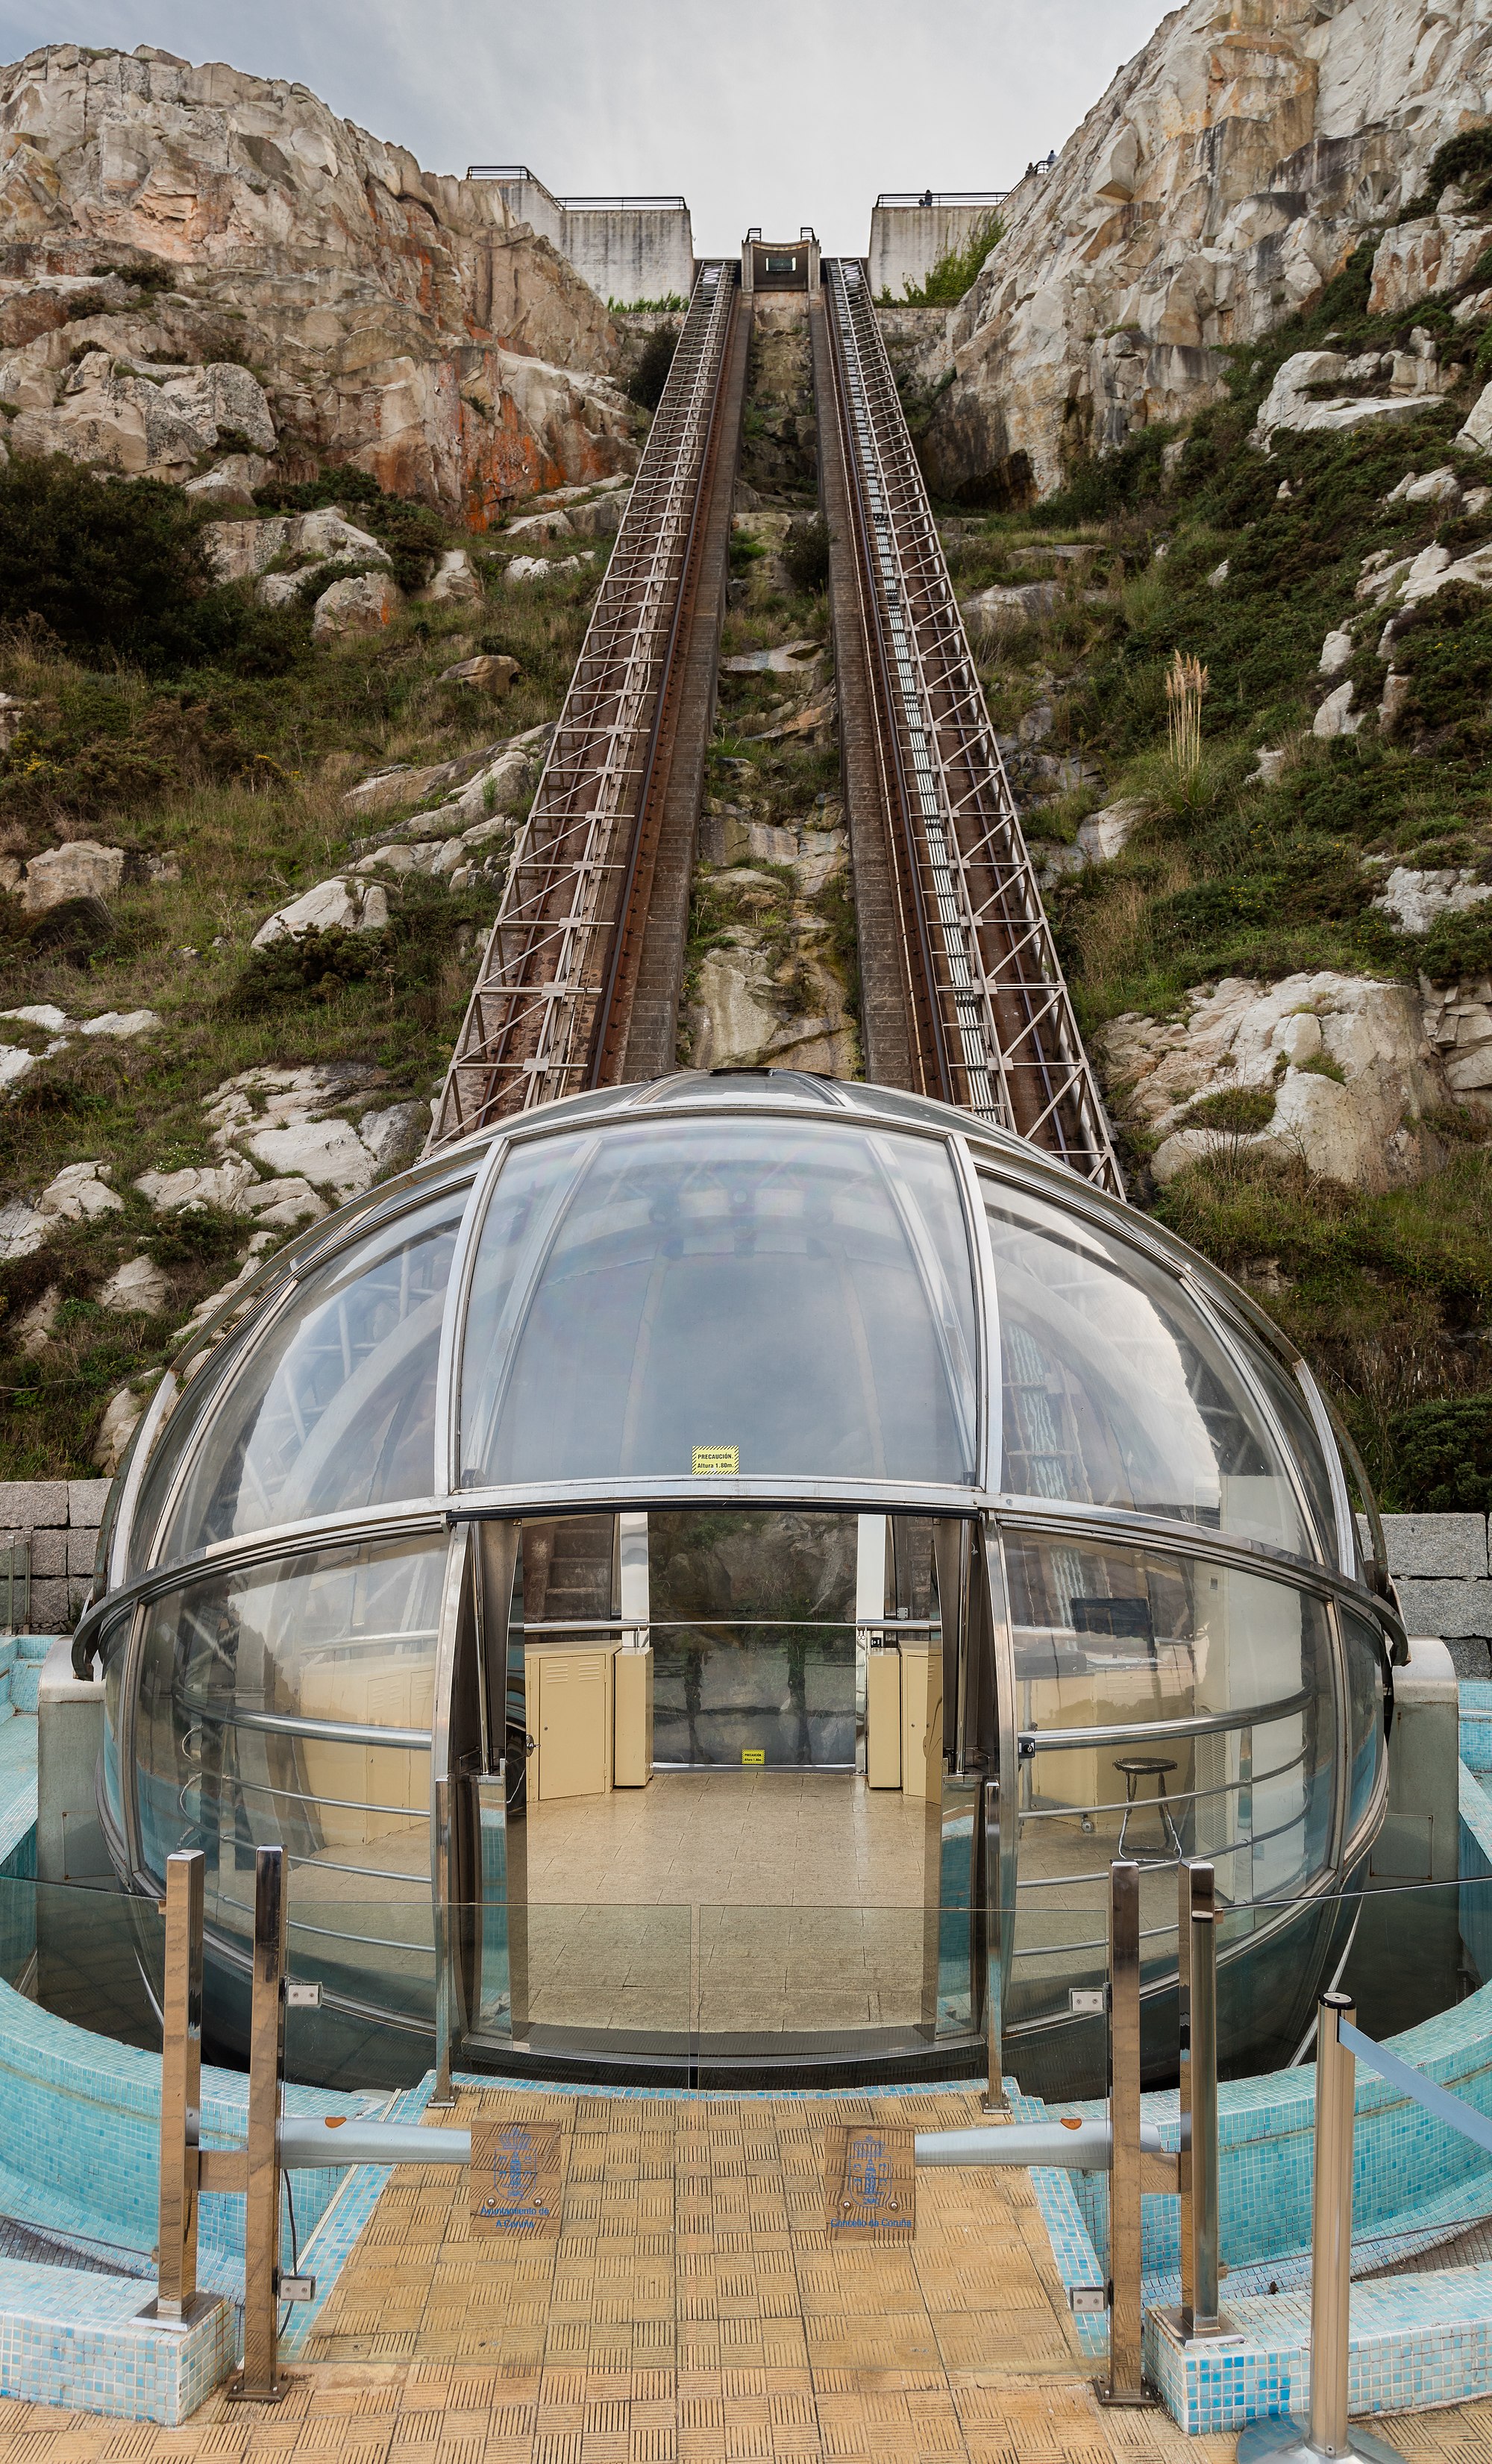 Panoramic lift to St Peter's Hill, La Coruña, Spain. Its track is 100 m long, and climbs 63 m. The lift has operated since 2007.